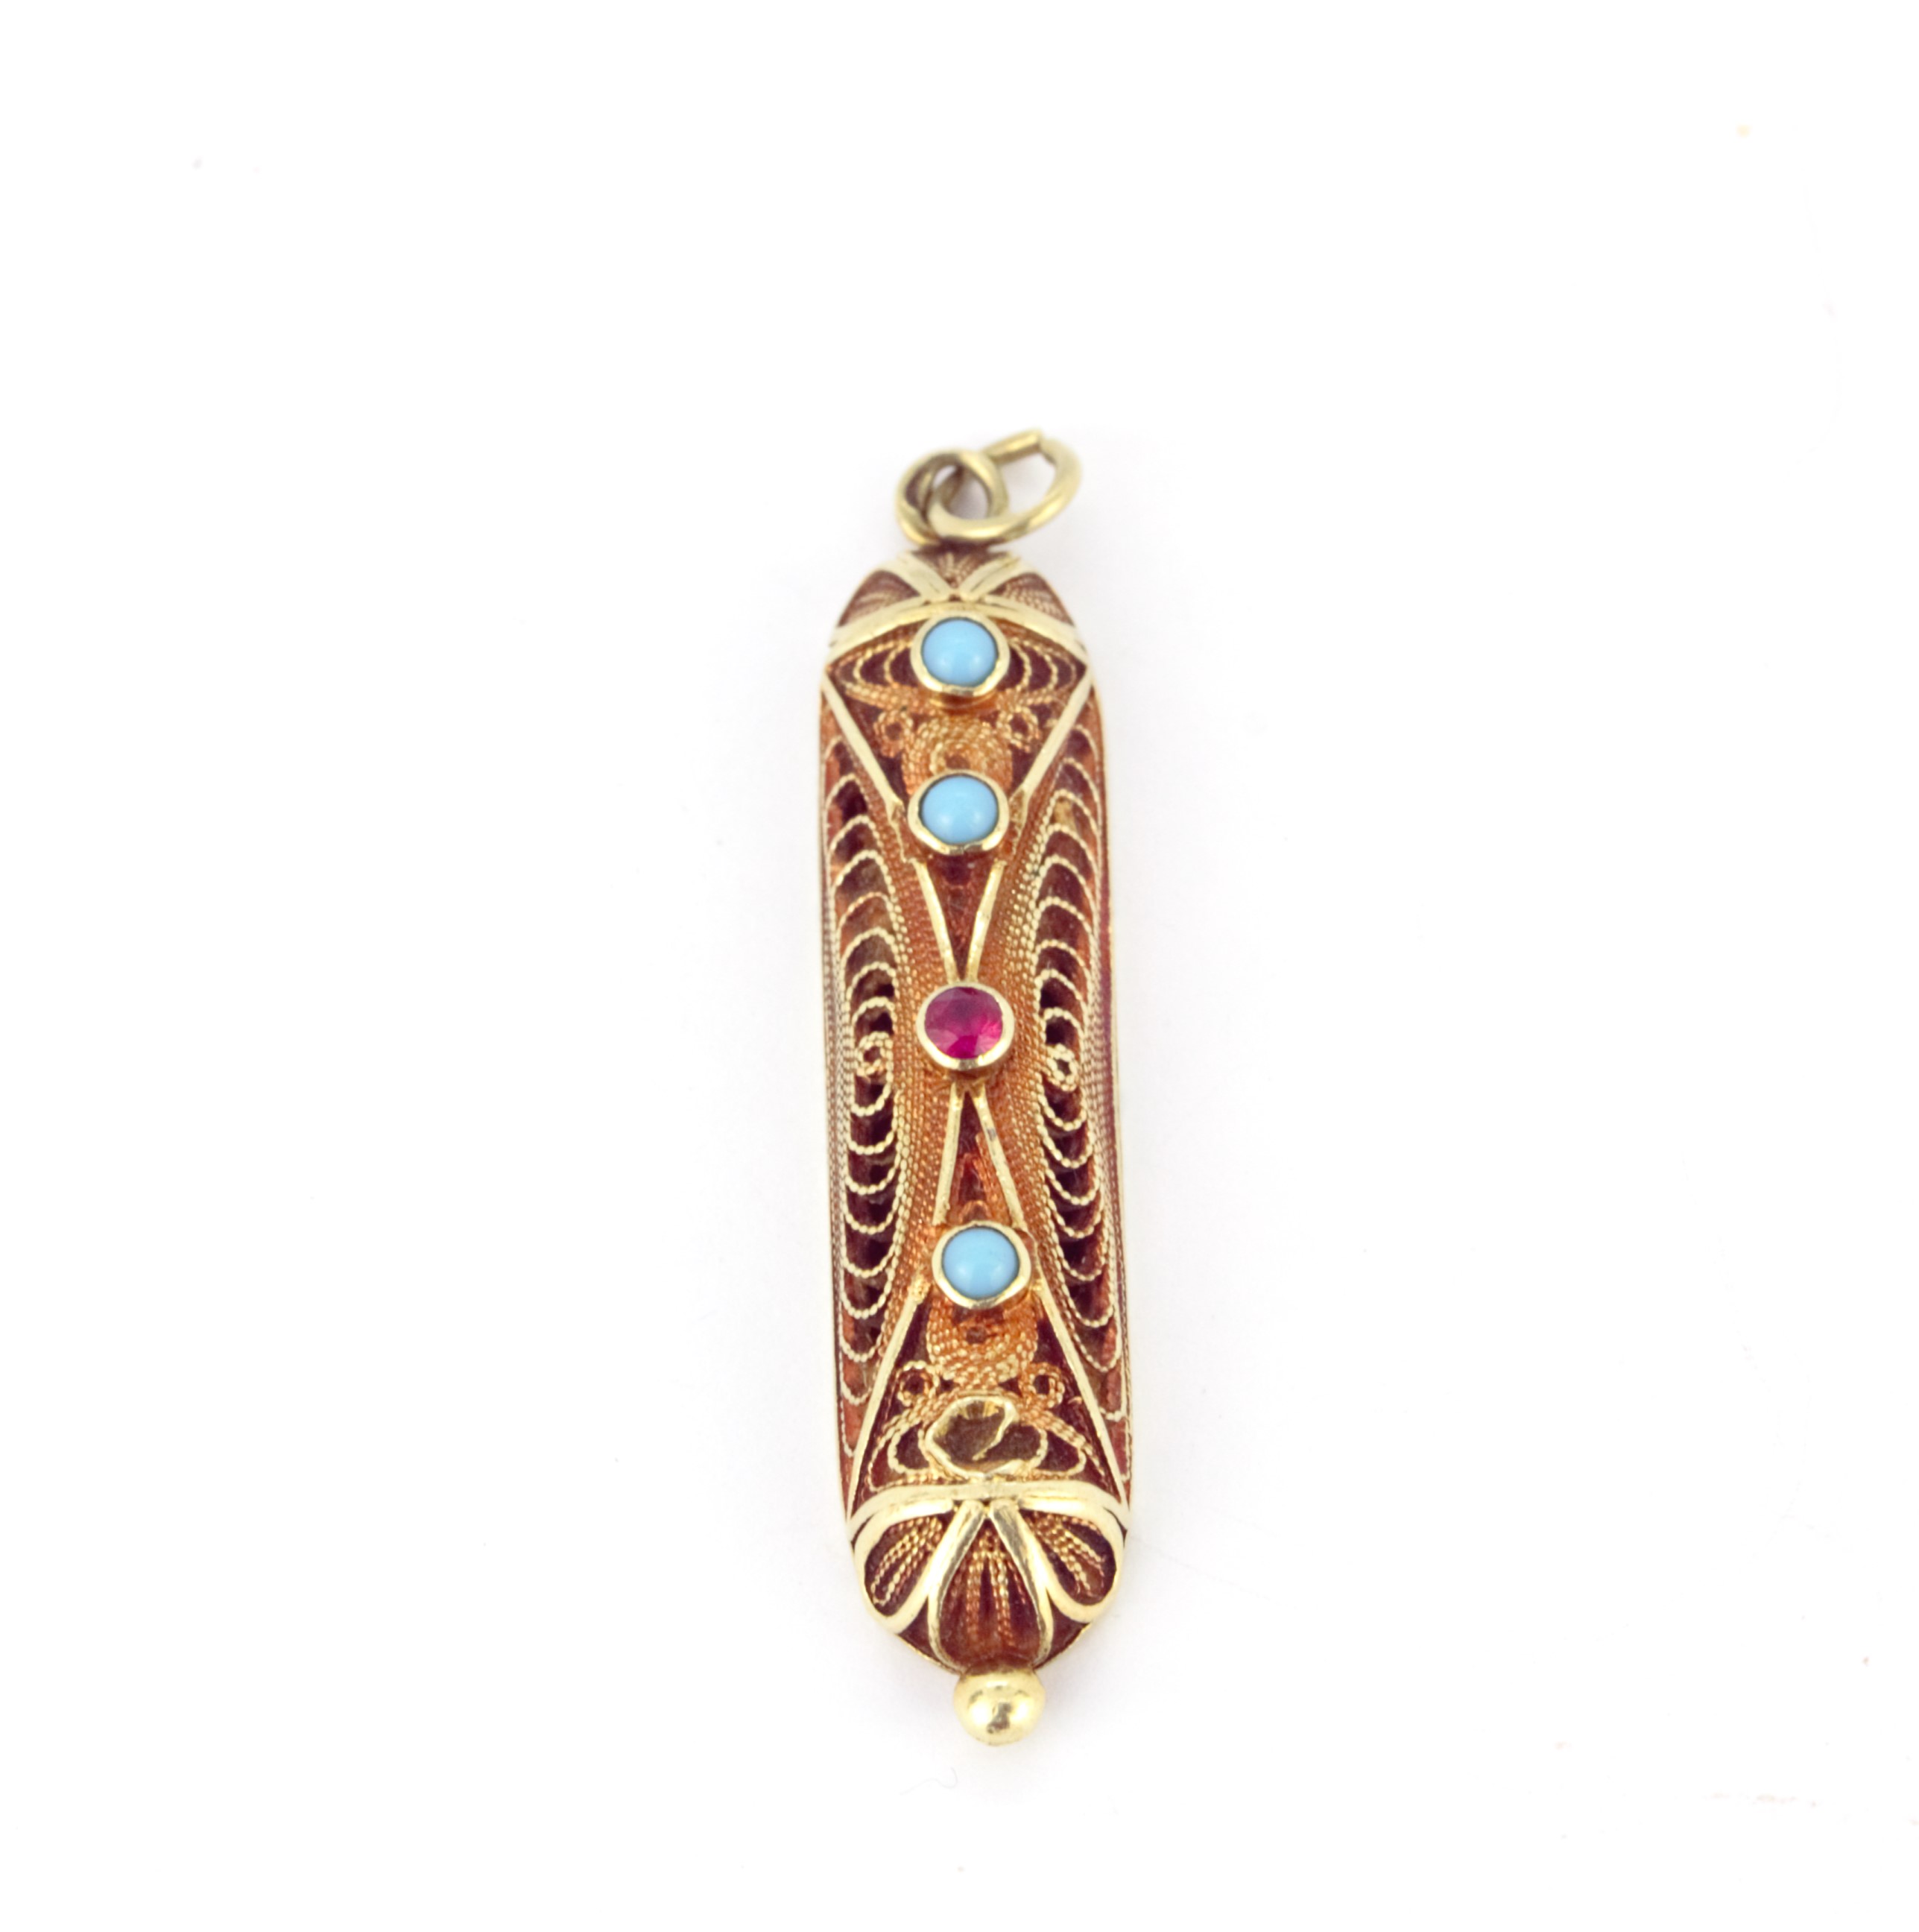 A 14ct yellow gold (stamped 585 and 14ct) filigree pendant set with turquoise and a red stone, L.